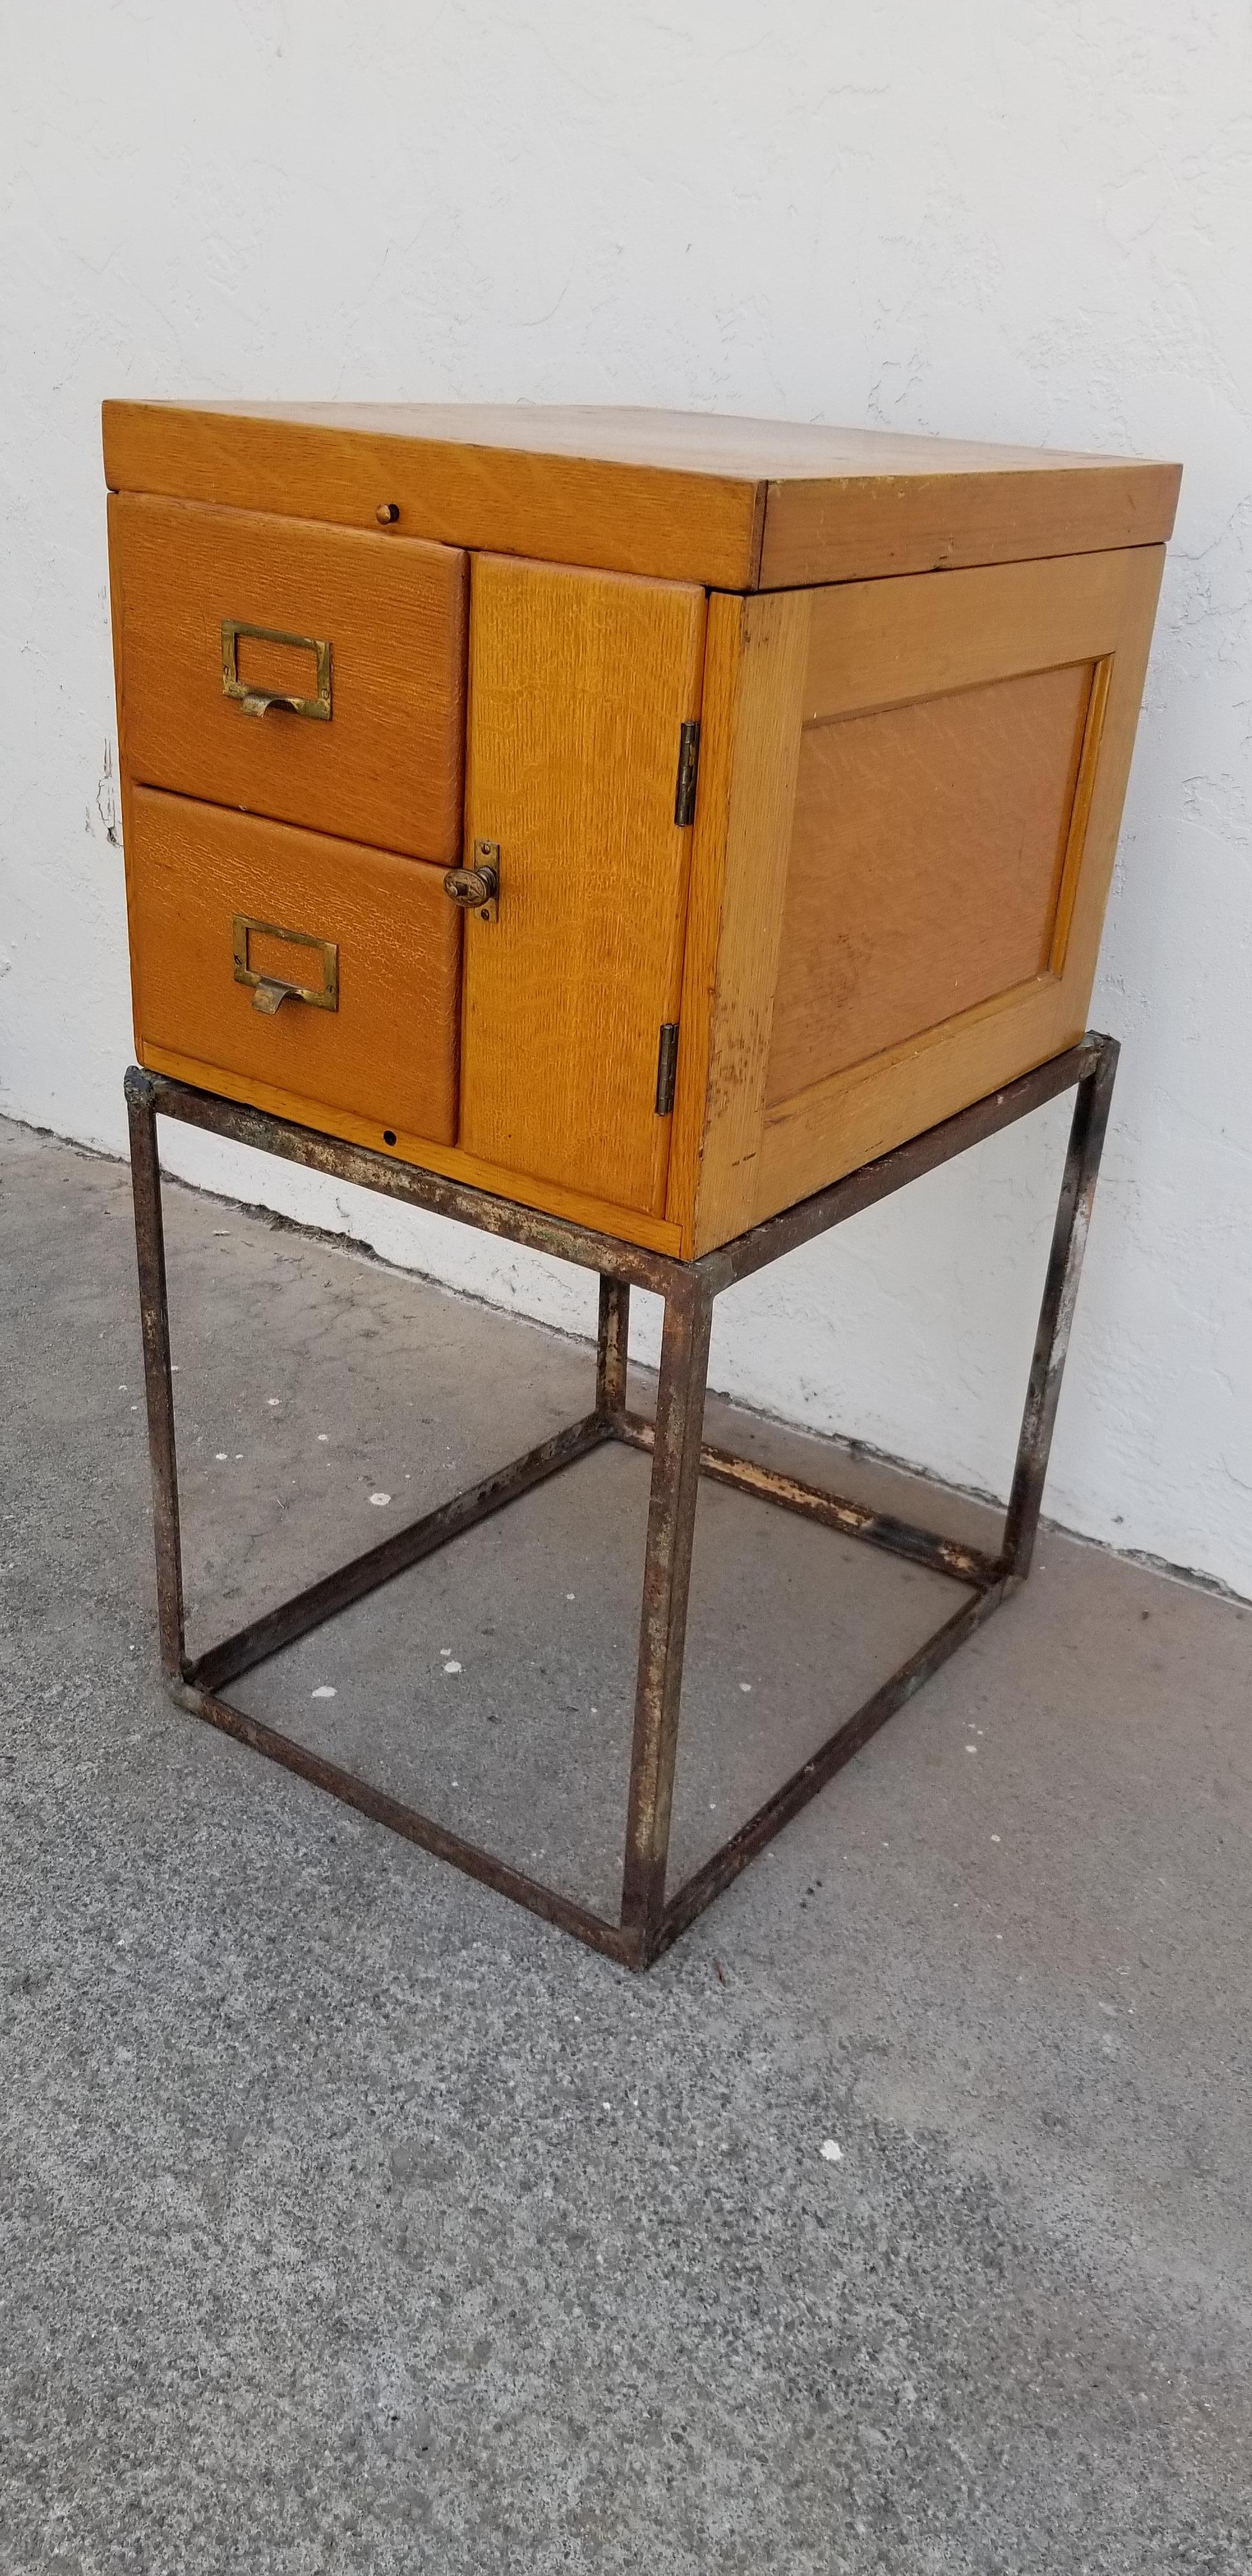 Nice marriage of an early 1900s oak file cabinet to an Industrial angle iron base. Good patina to iron base. Cabinet consists of two files and storage area. Original hardware and finish to cabinet. Could work as an end table or entry piece. Unique.